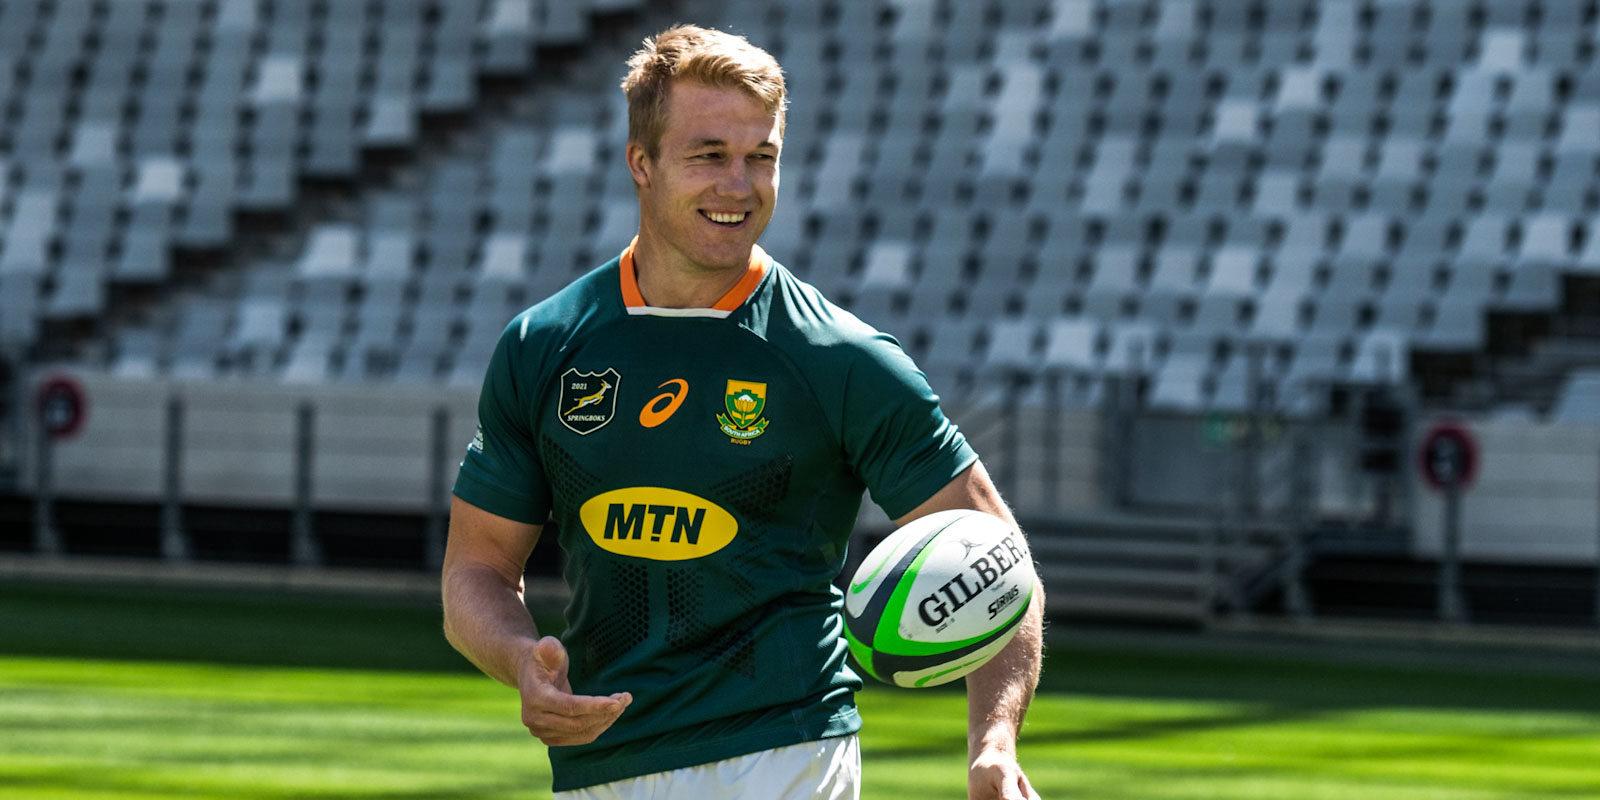 south african rugby shirt 2020